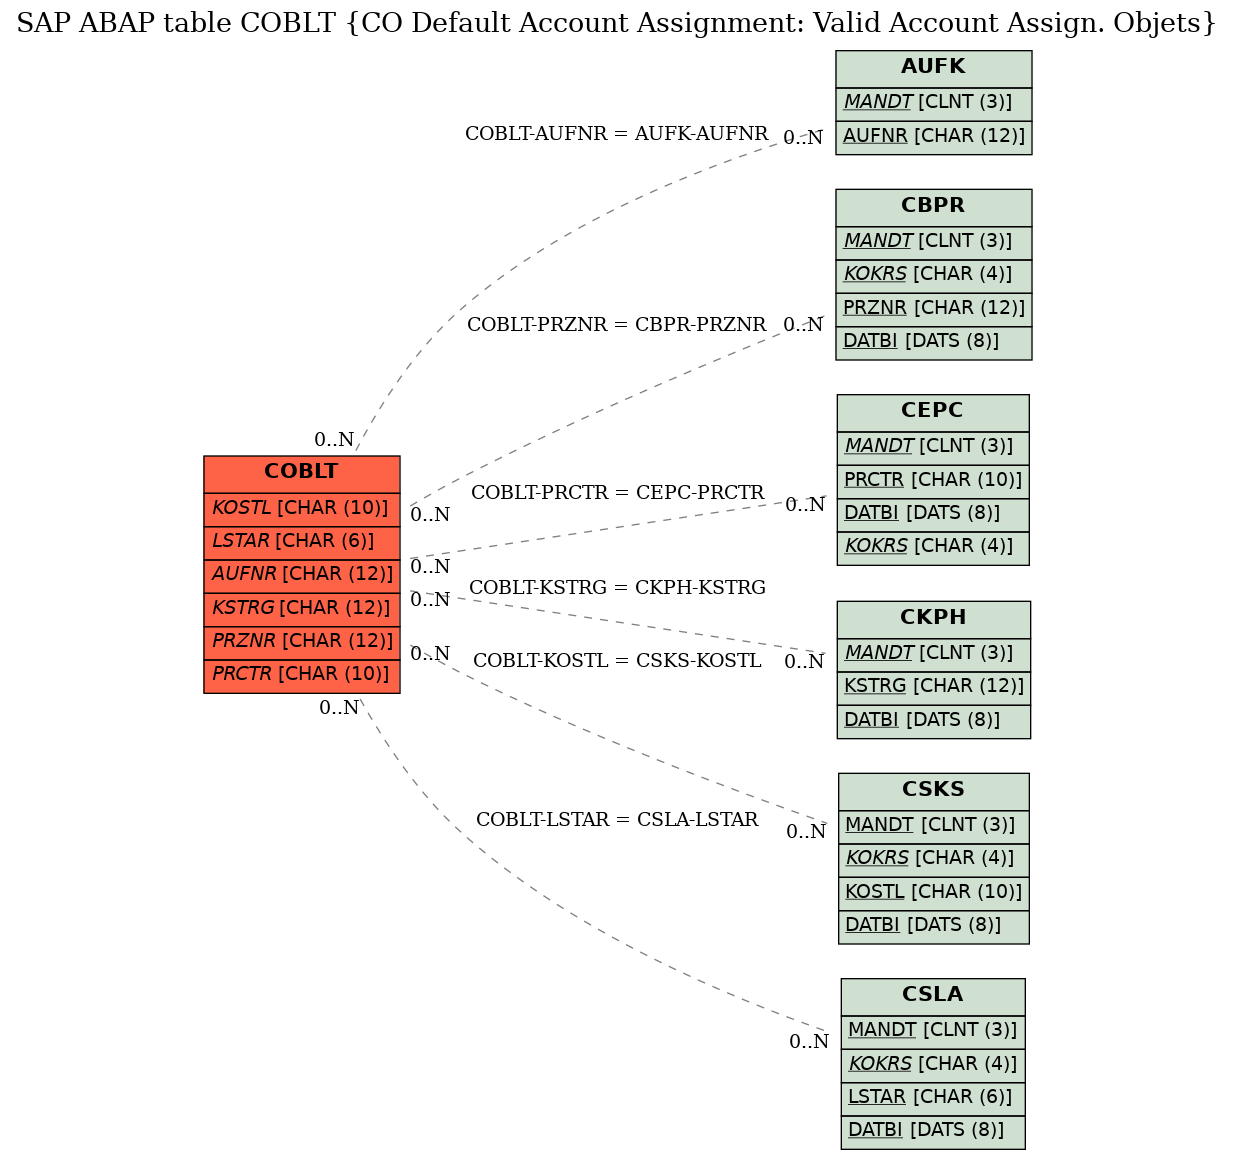 E-R Diagram for table COBLT (CO Default Account Assignment: Valid Account Assign. Objets)